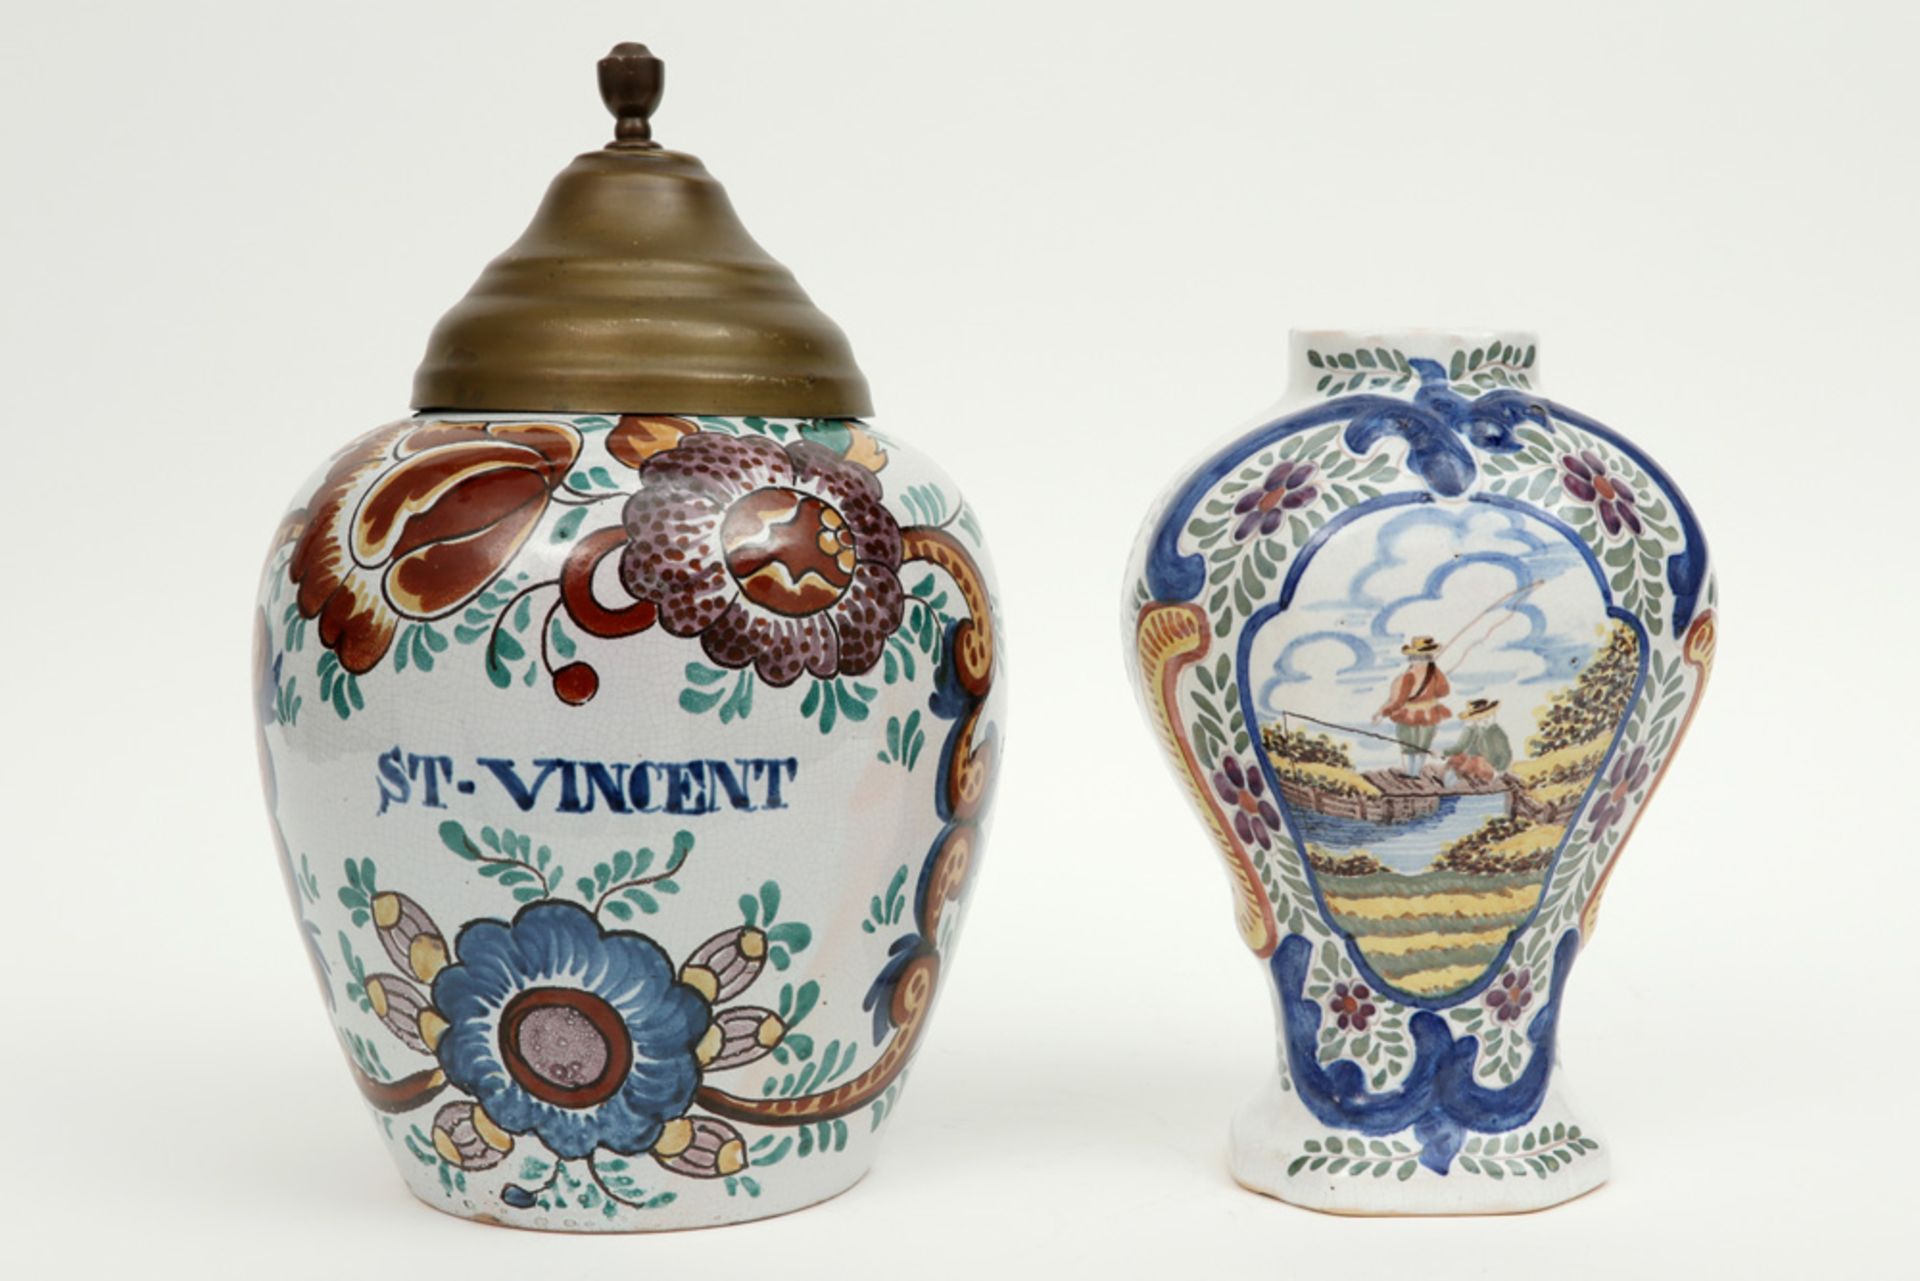 vase and tobacco jar in marked ceramic from Delft with a polychrome decor